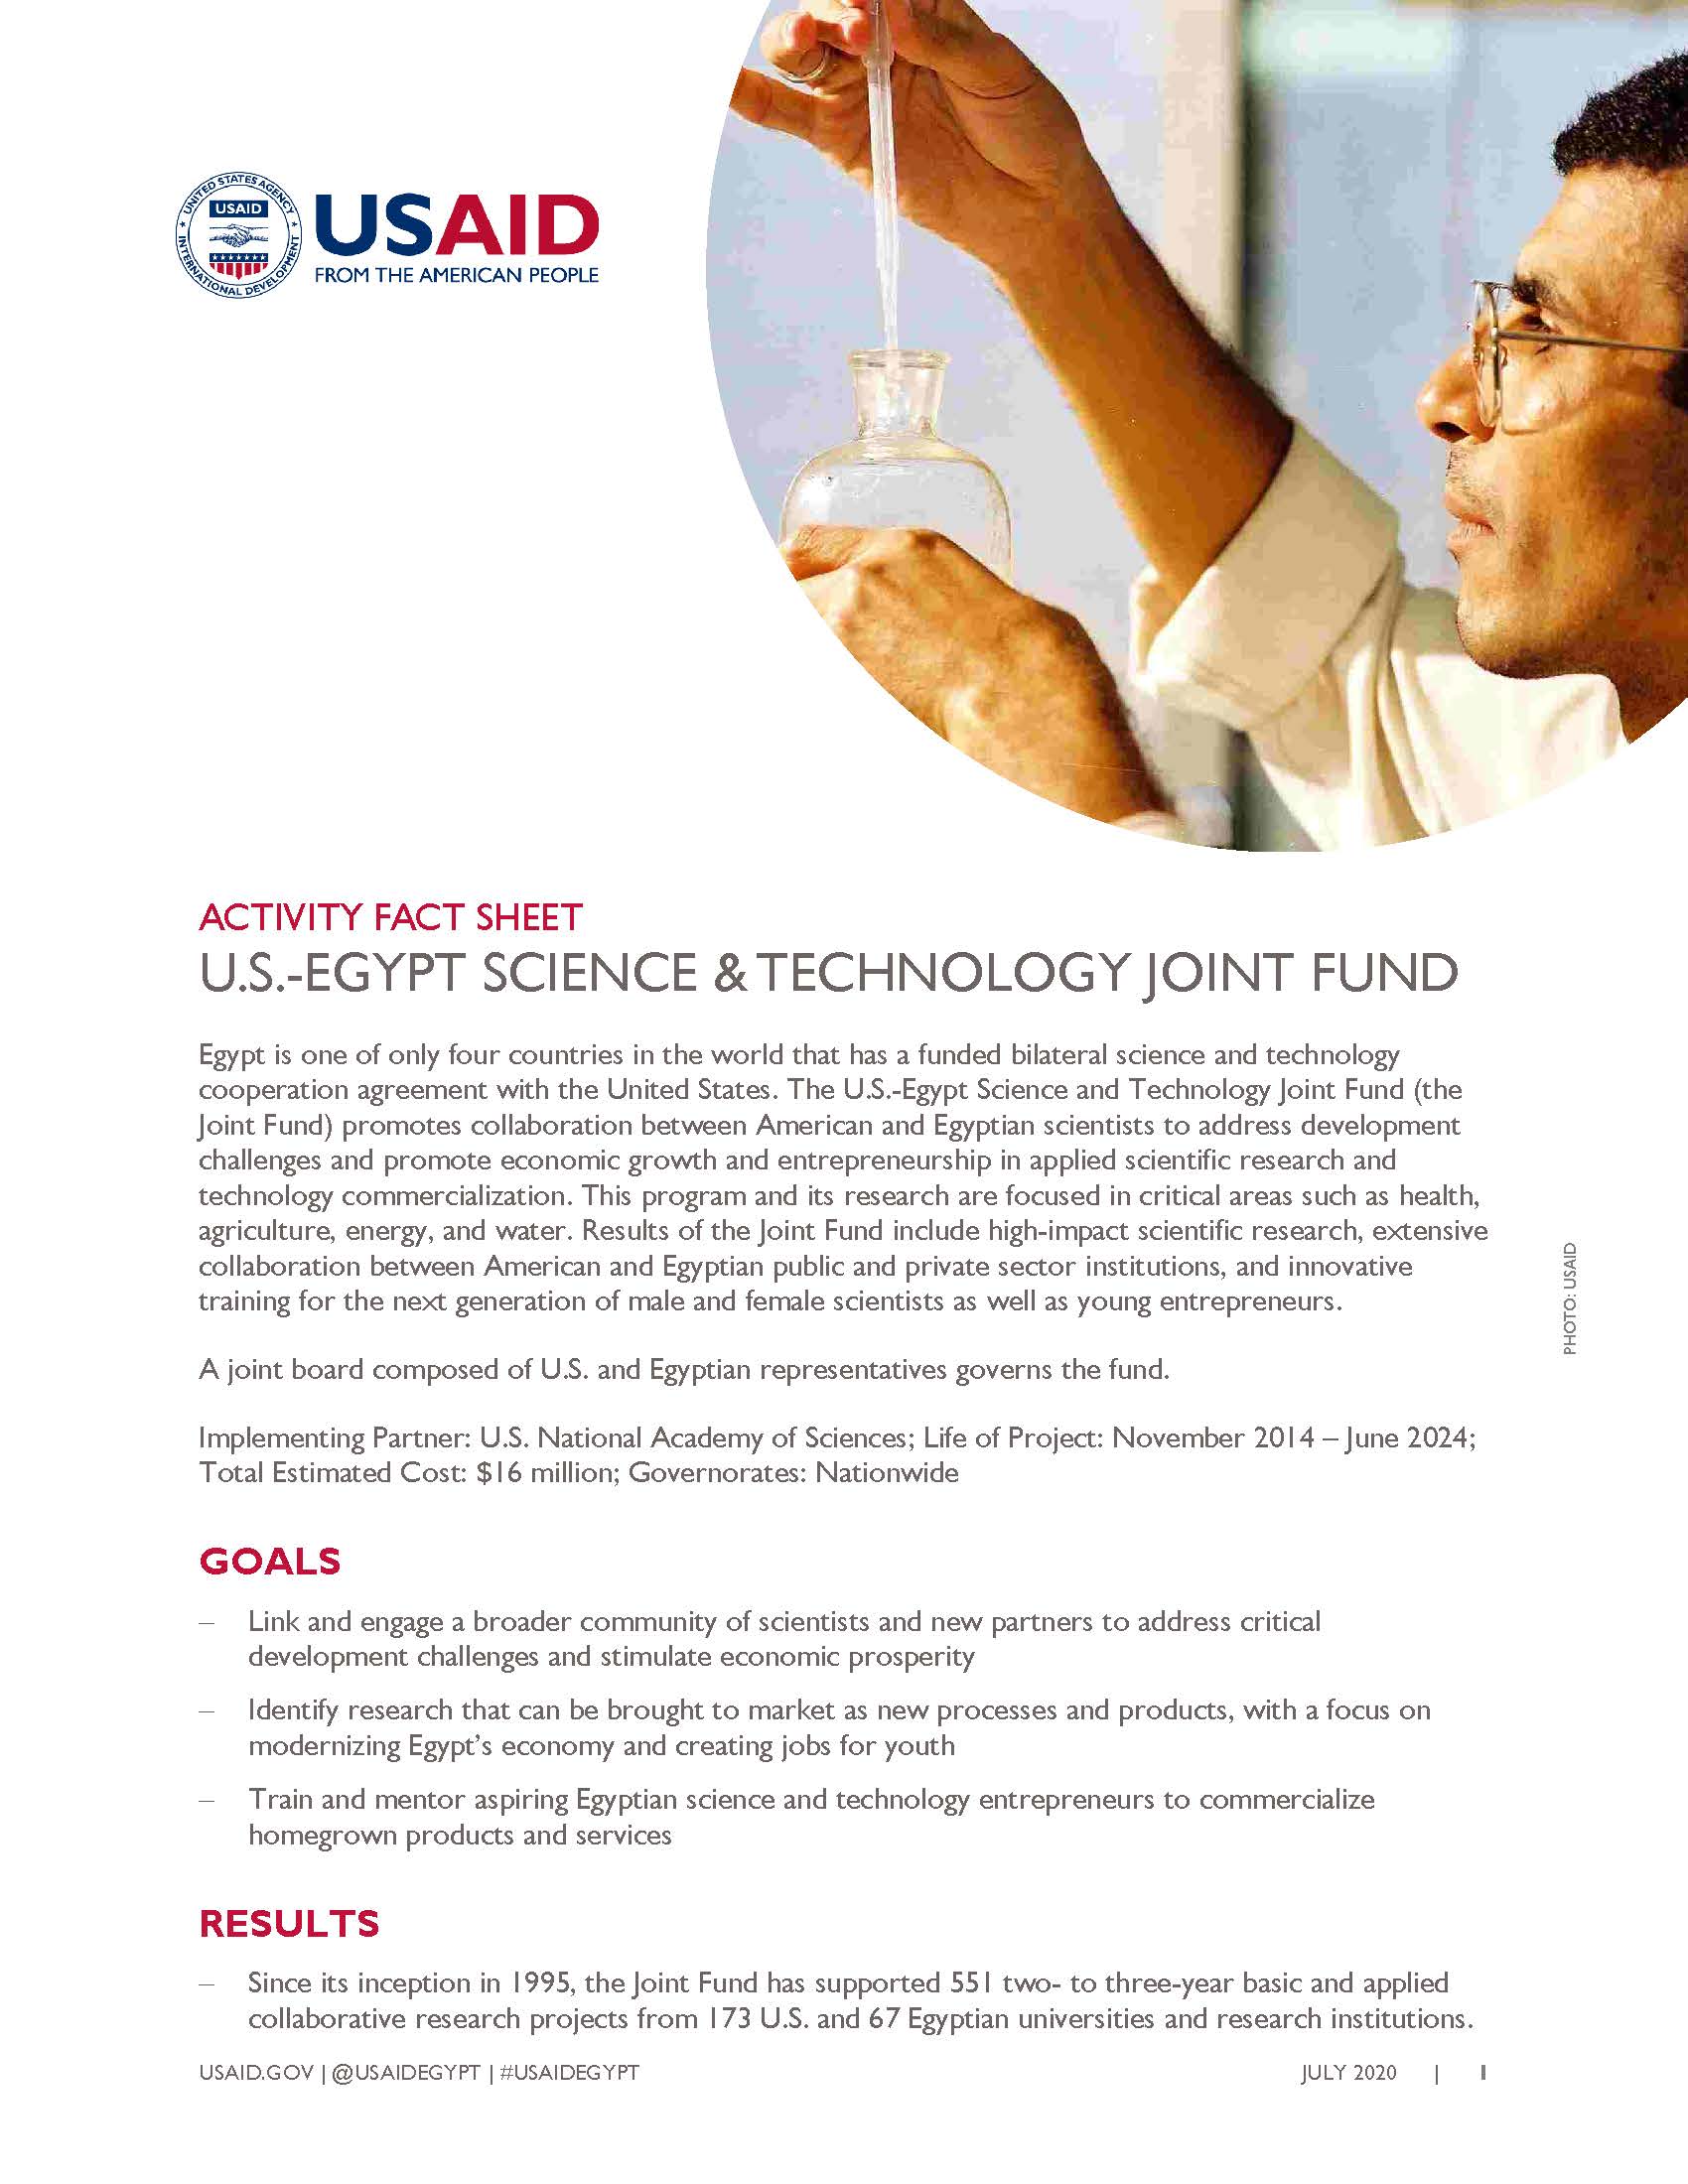 USAID/Egypt Activity Fact Sheet: U.S.-Egypt Science and Technology Joint Fund